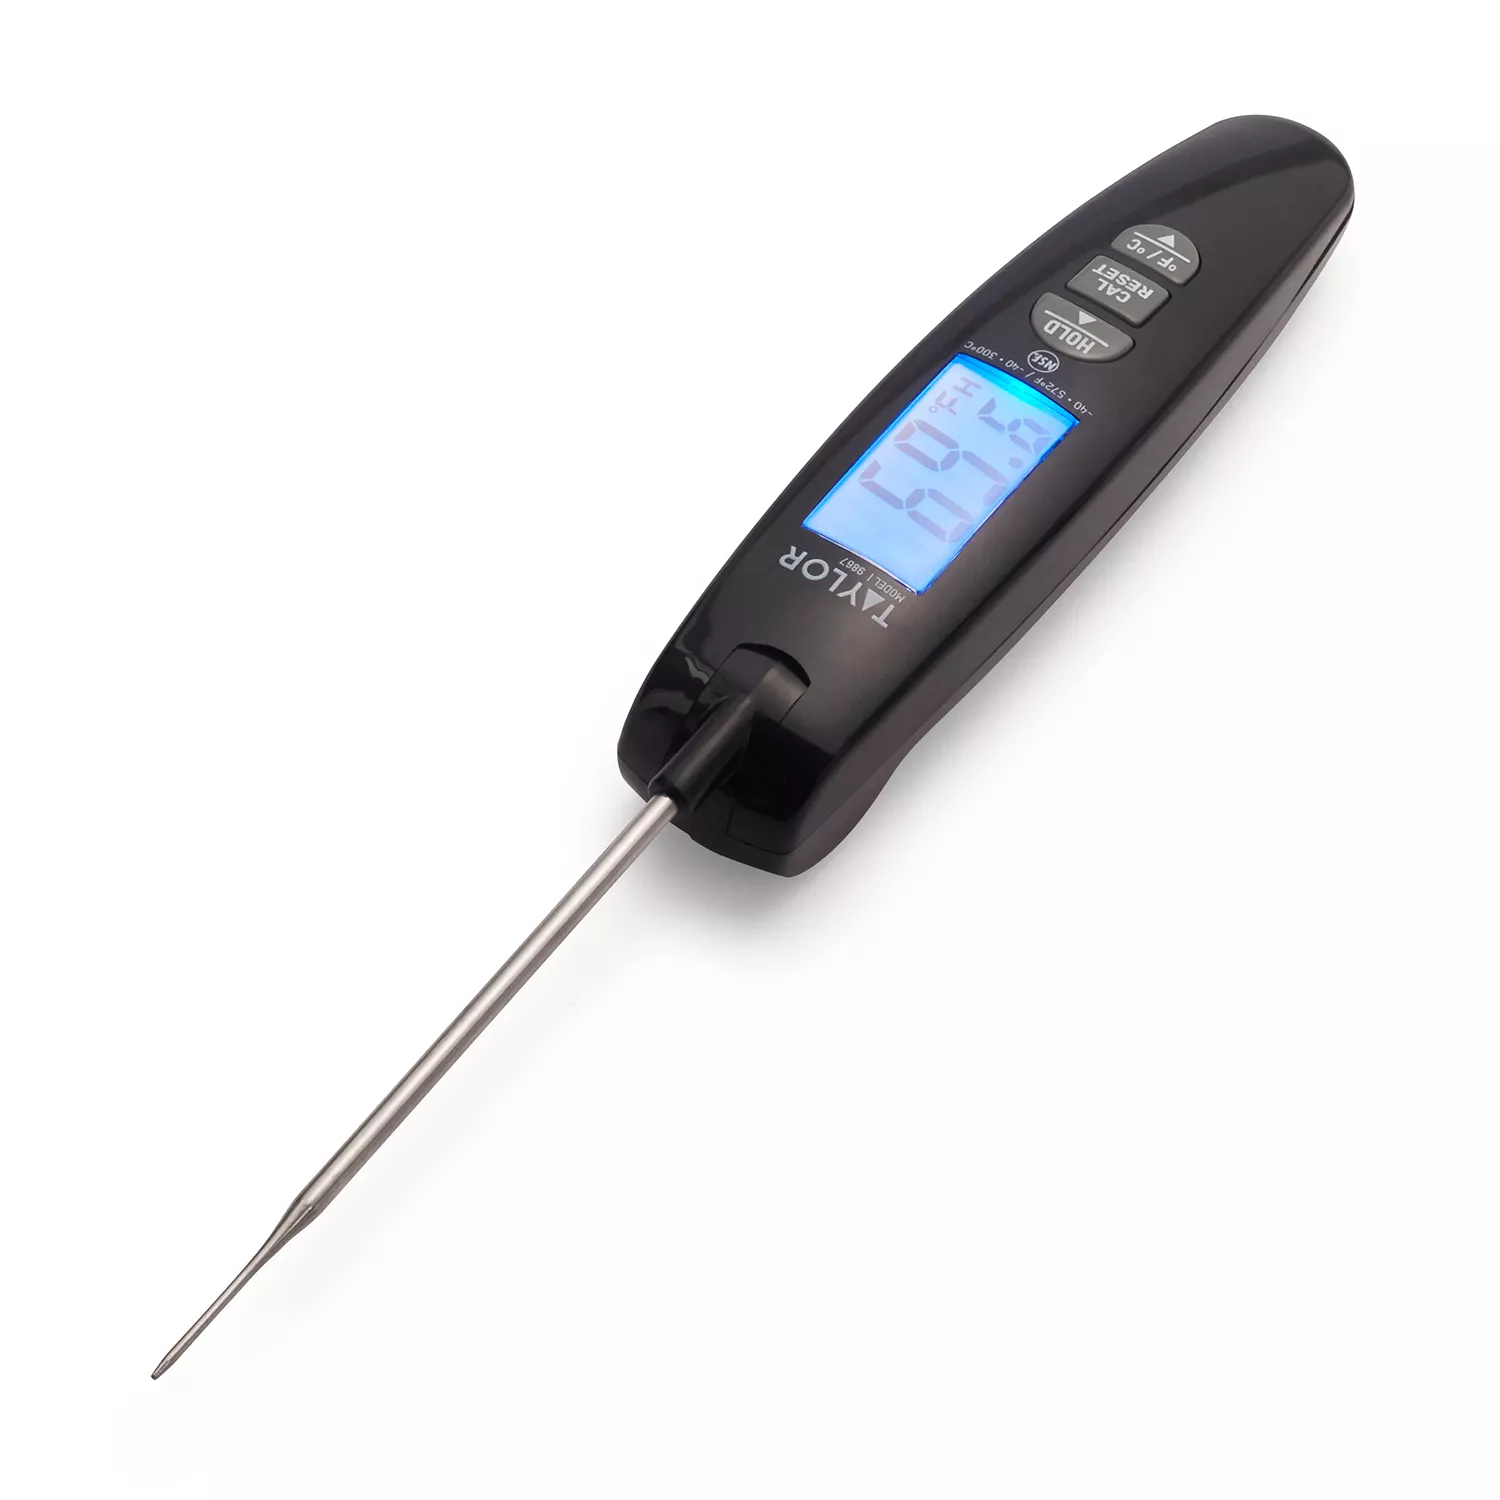  Taylor Classic Line Candy/Deep Fry Thermometer : Taylor